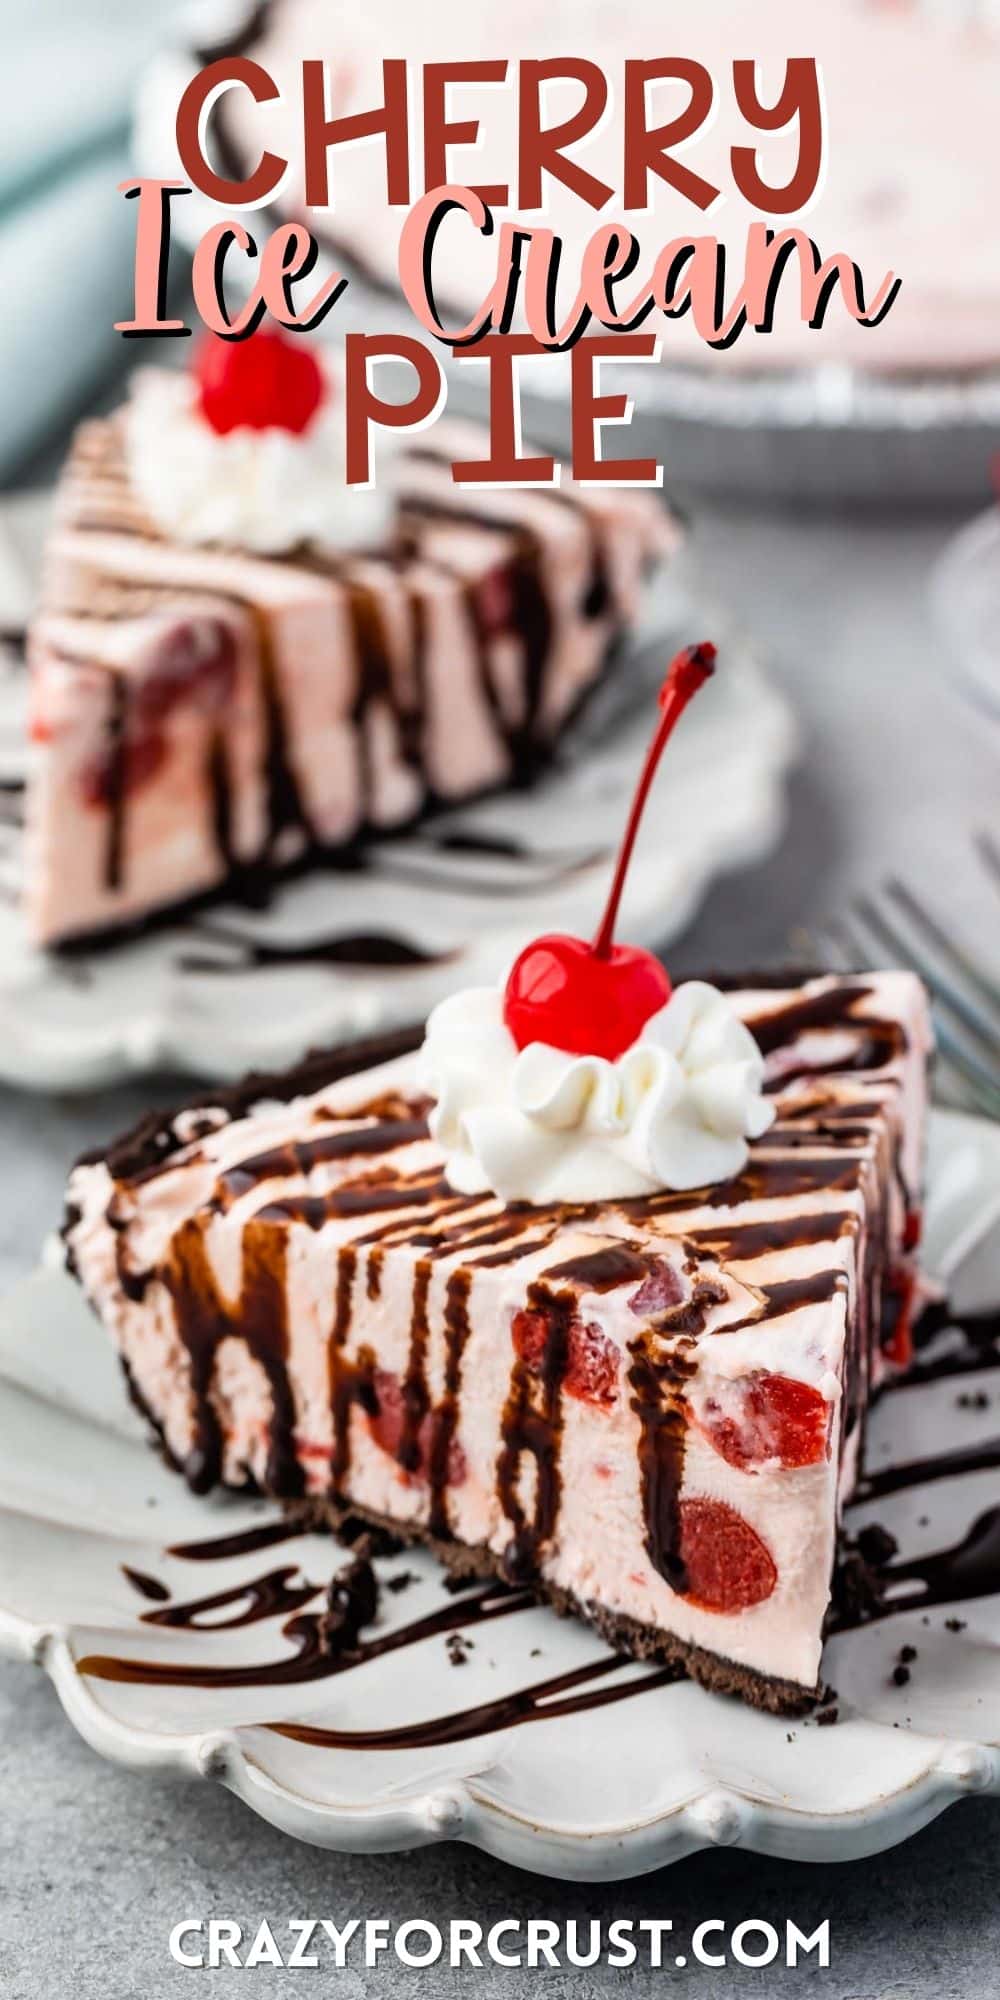 pink slice of pie covered in chocolate sauce, whipped cream and a cherry with words on the image.